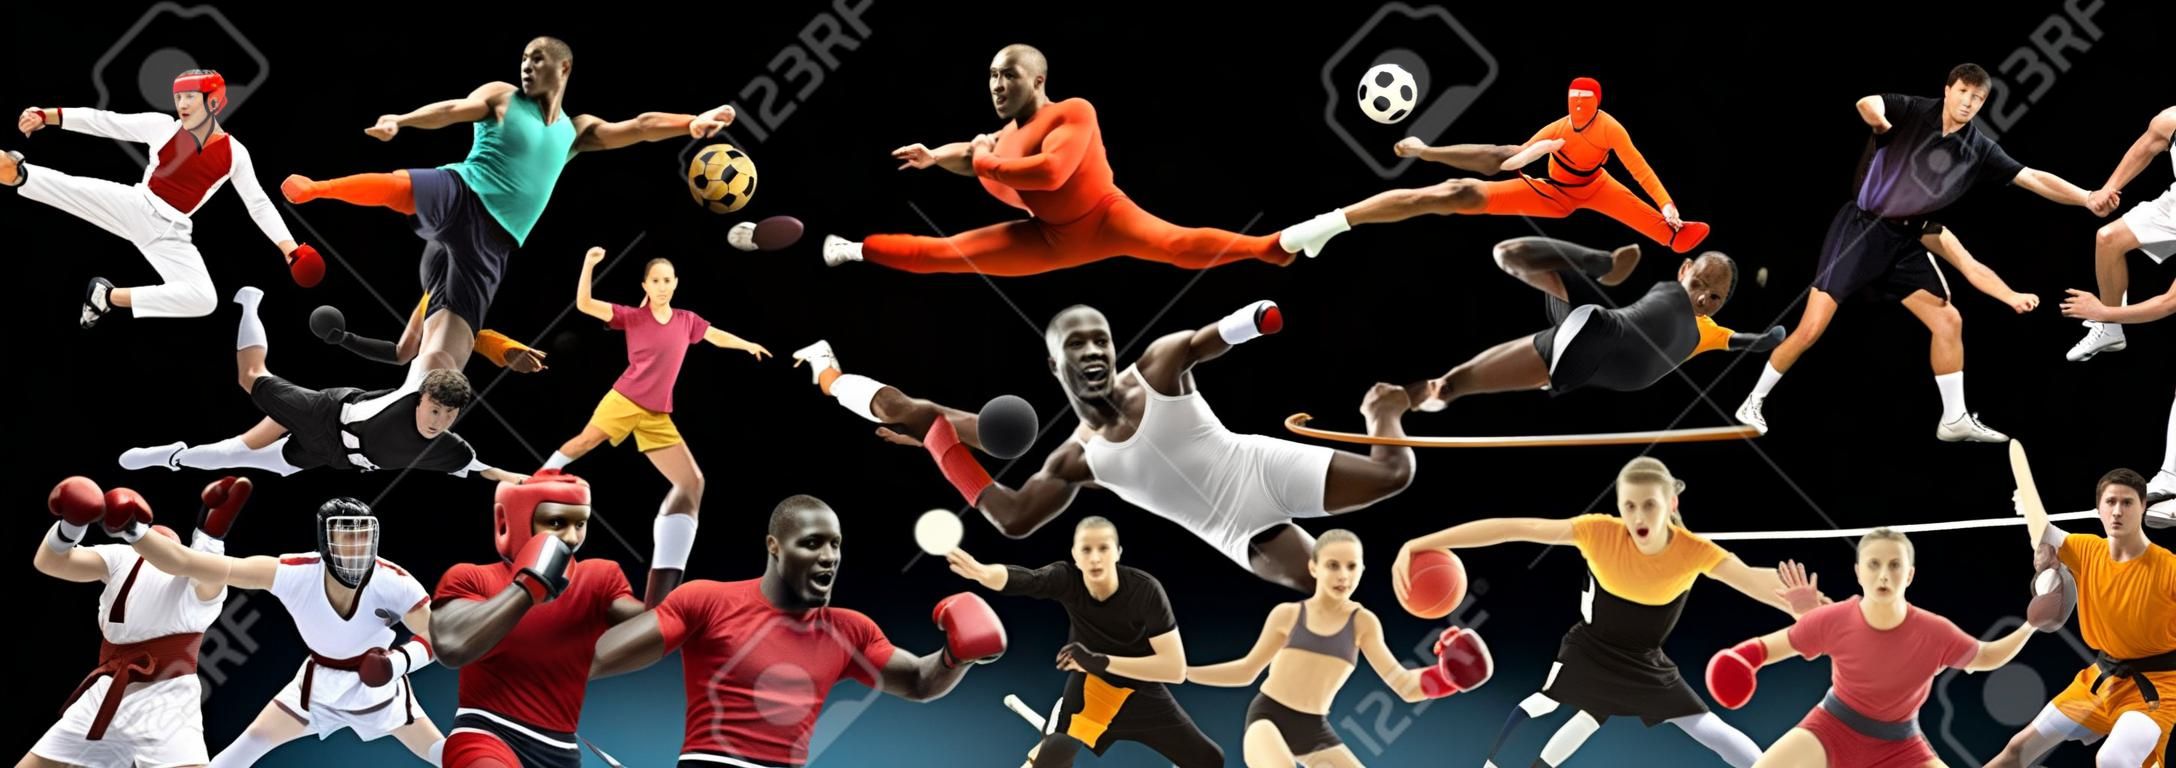 Sport collage about kickboxing, football, basketball, ice hockey, badminton, volleyball, snowboard, aikido, karate tennis, rugby, gymnastics on black background